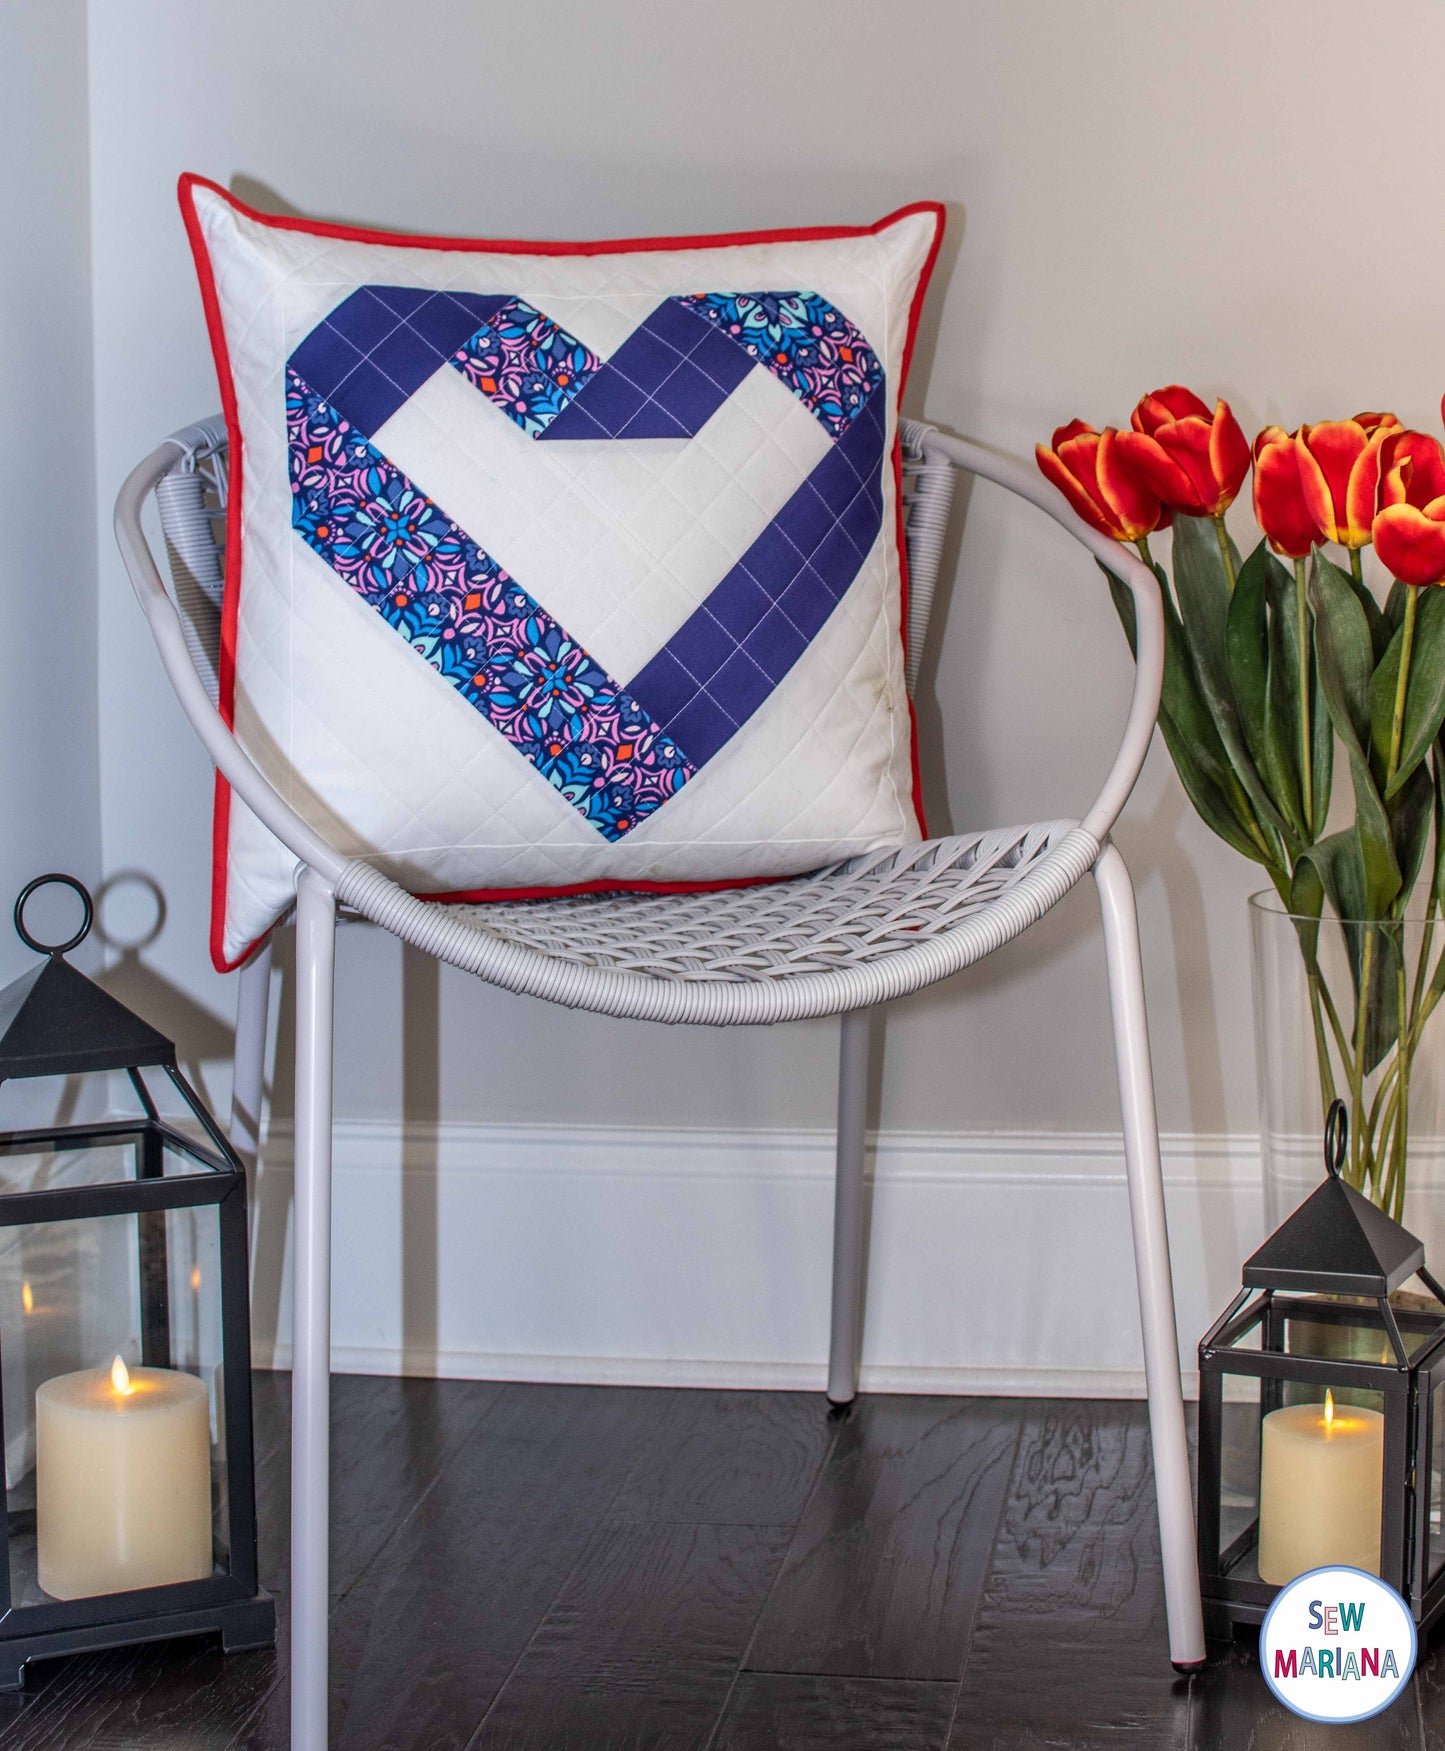 A pillow made with one block of the in my heart quilt pattern it's shown on a light gray chair and candle lights on the floor